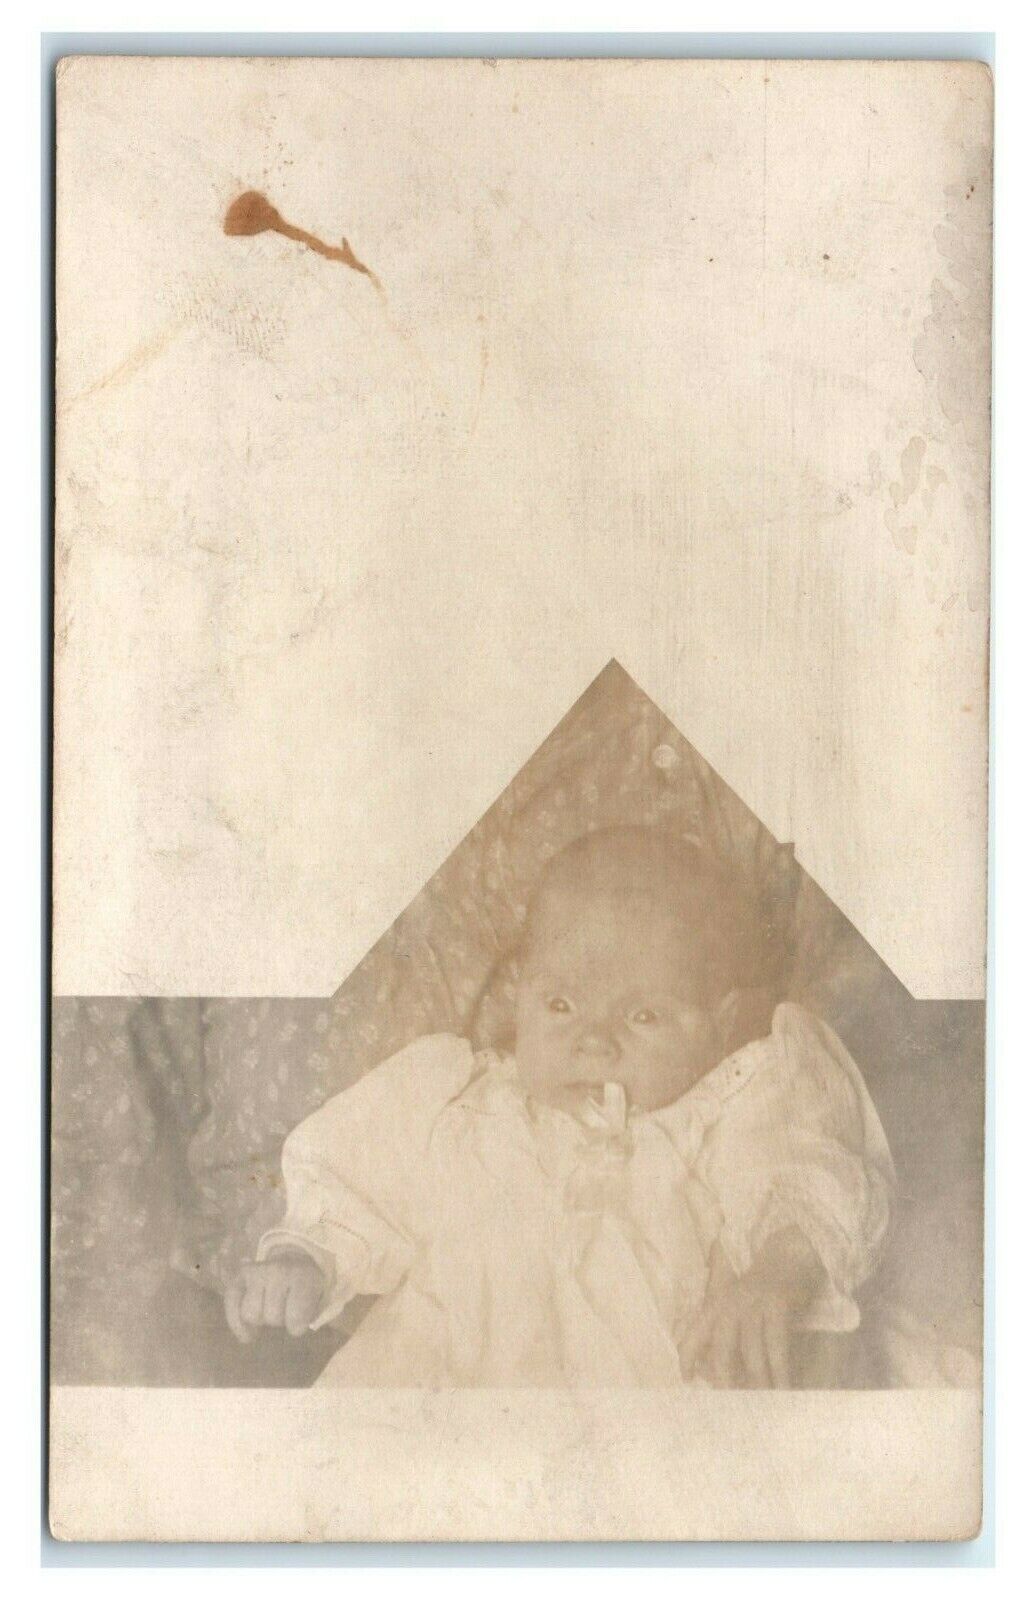 Postcard Infant Child (surprised look, likely from the flash) RPPC L12